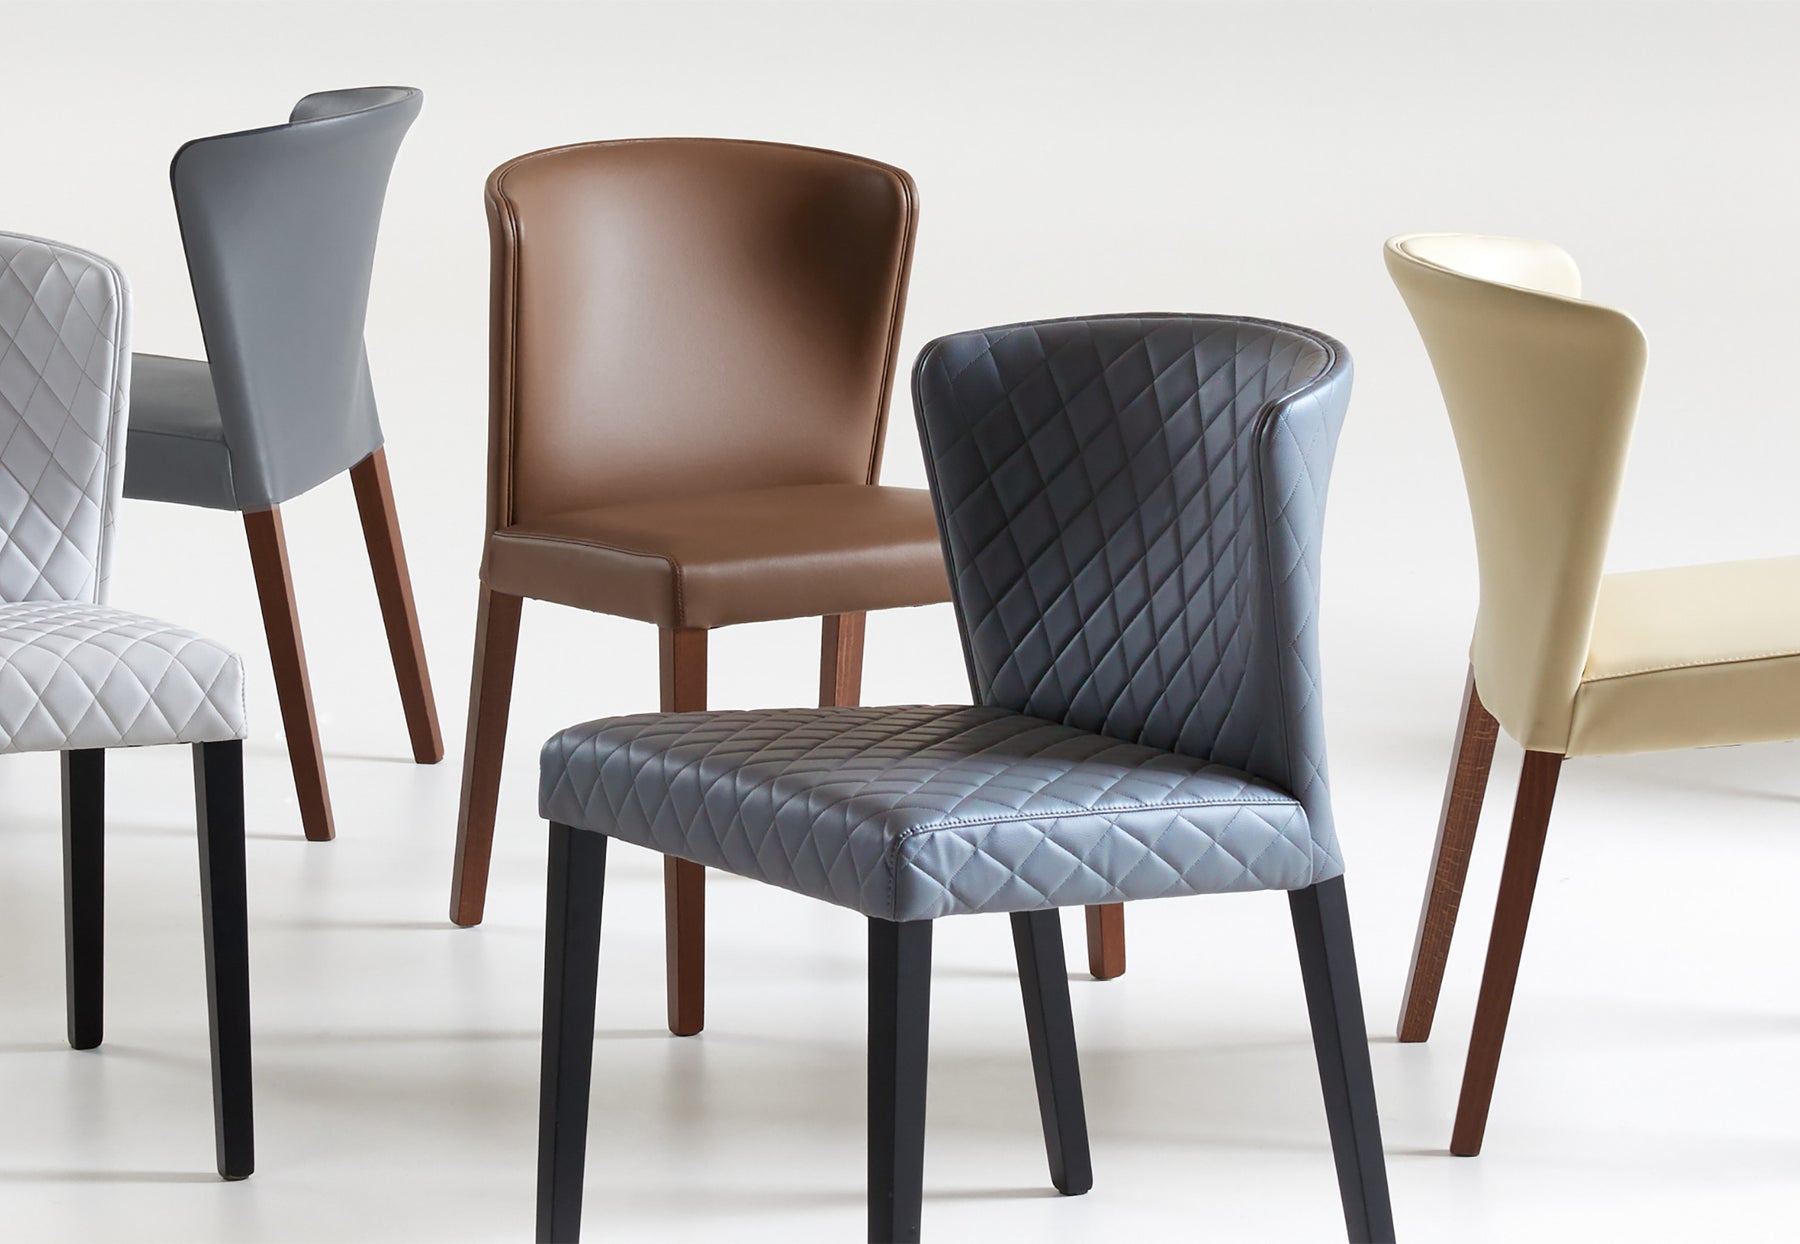 A Guide to Finding the Perfect Dining Chair